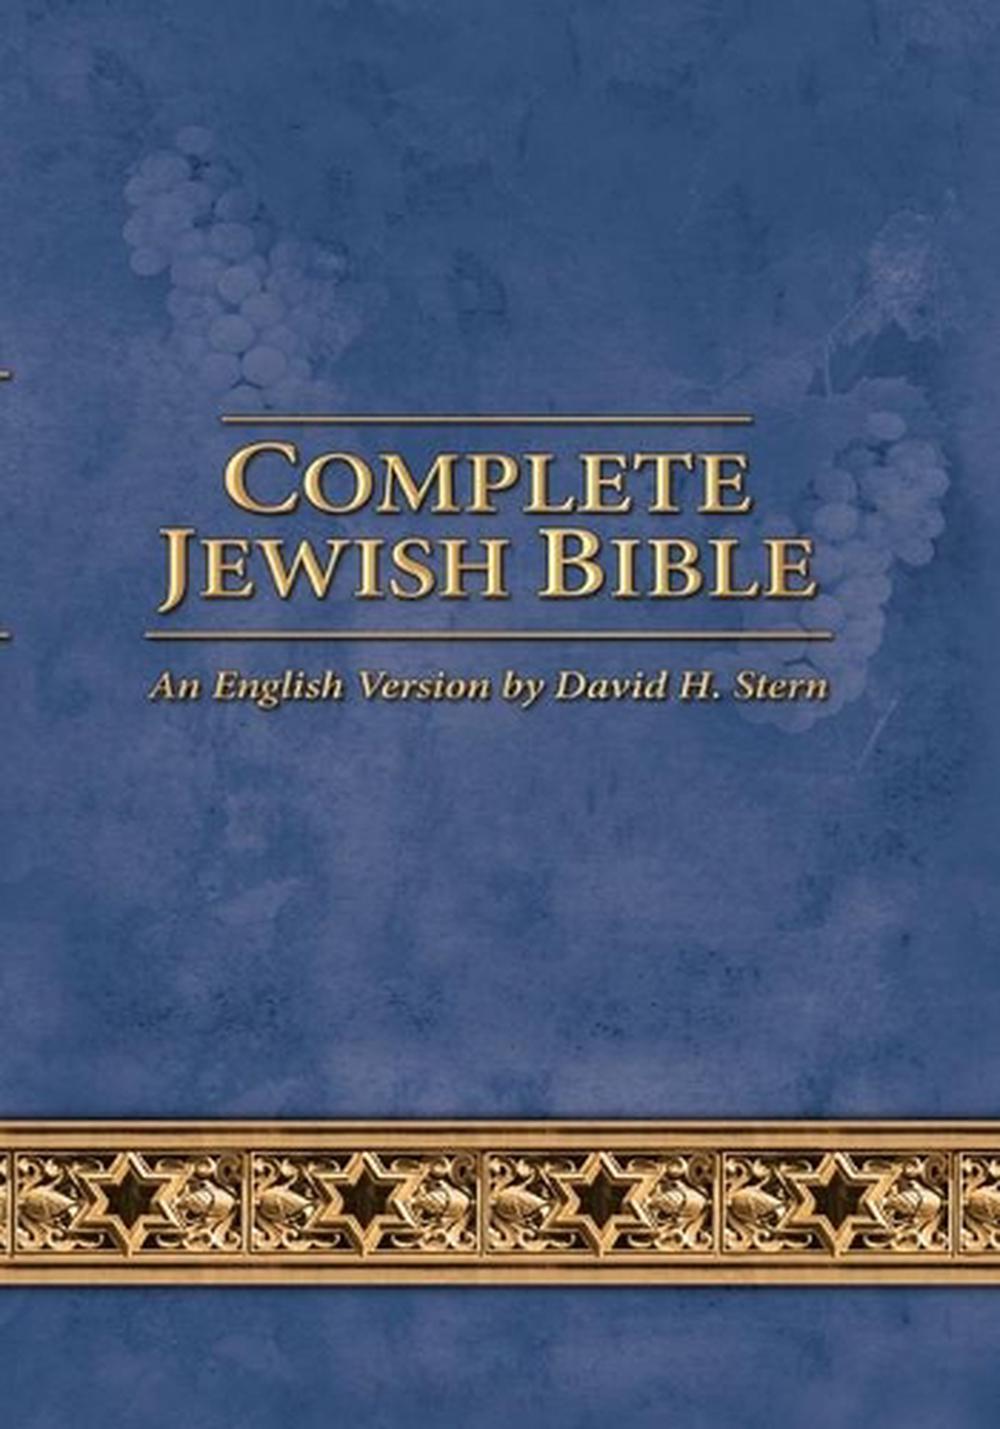 essays on ethics a weekly reading of the jewish bible